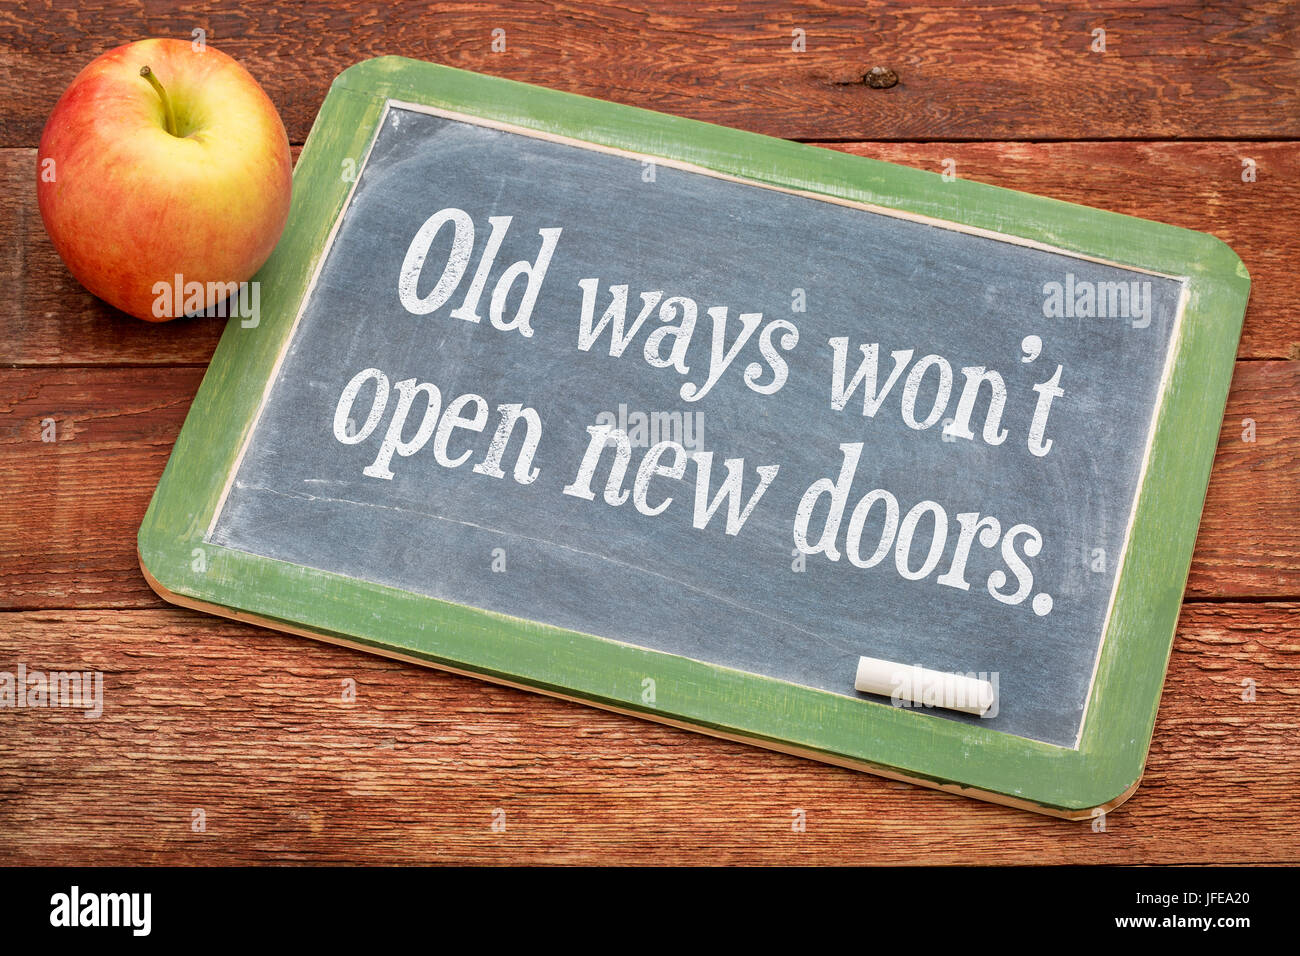 Old ways do not open new doors - motivational quote on a slate blackboard against red barn wood Stock Photo